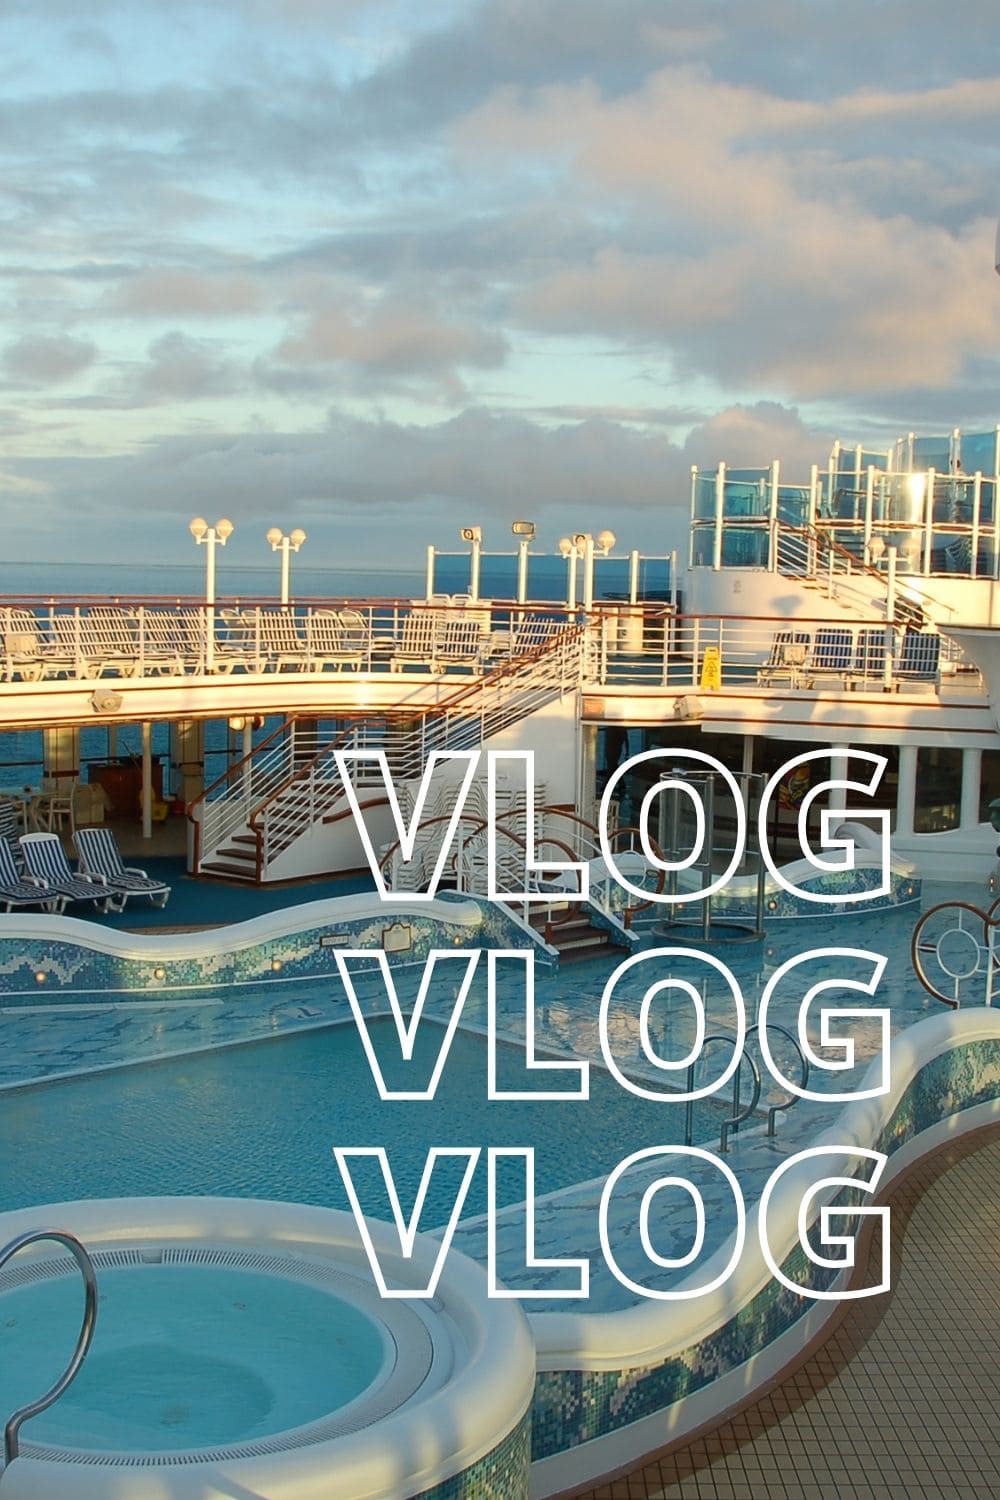 6 of the Best Cruise Vloggers and their YouTube Channels to Follow